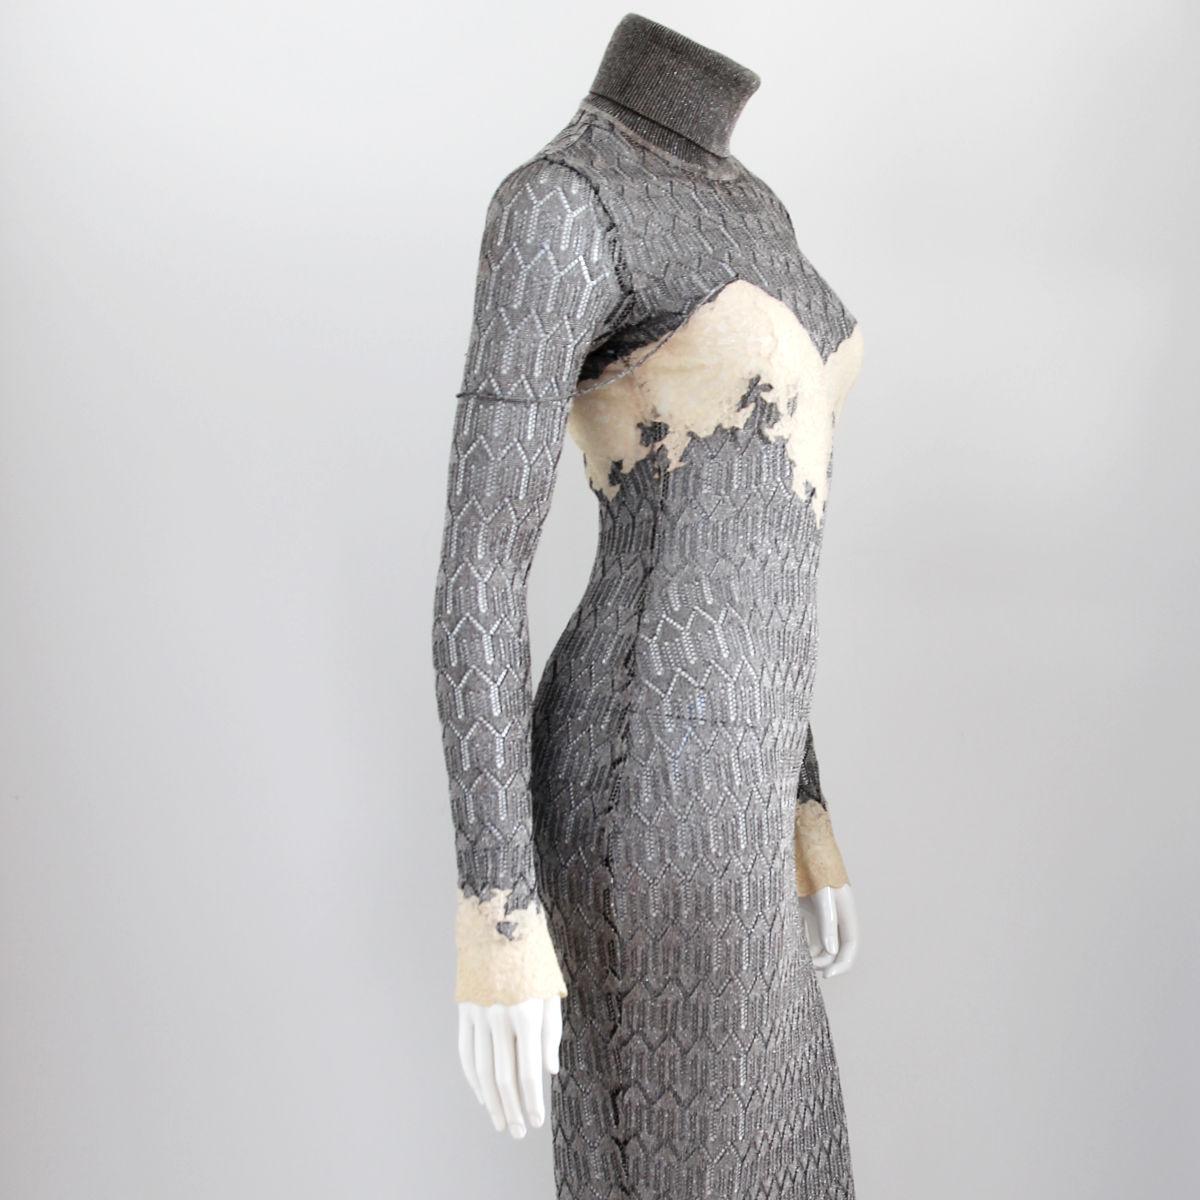 CHRISTIAN DIOR 1998 Sheer Silver Gown / Dress by John Galliano 5